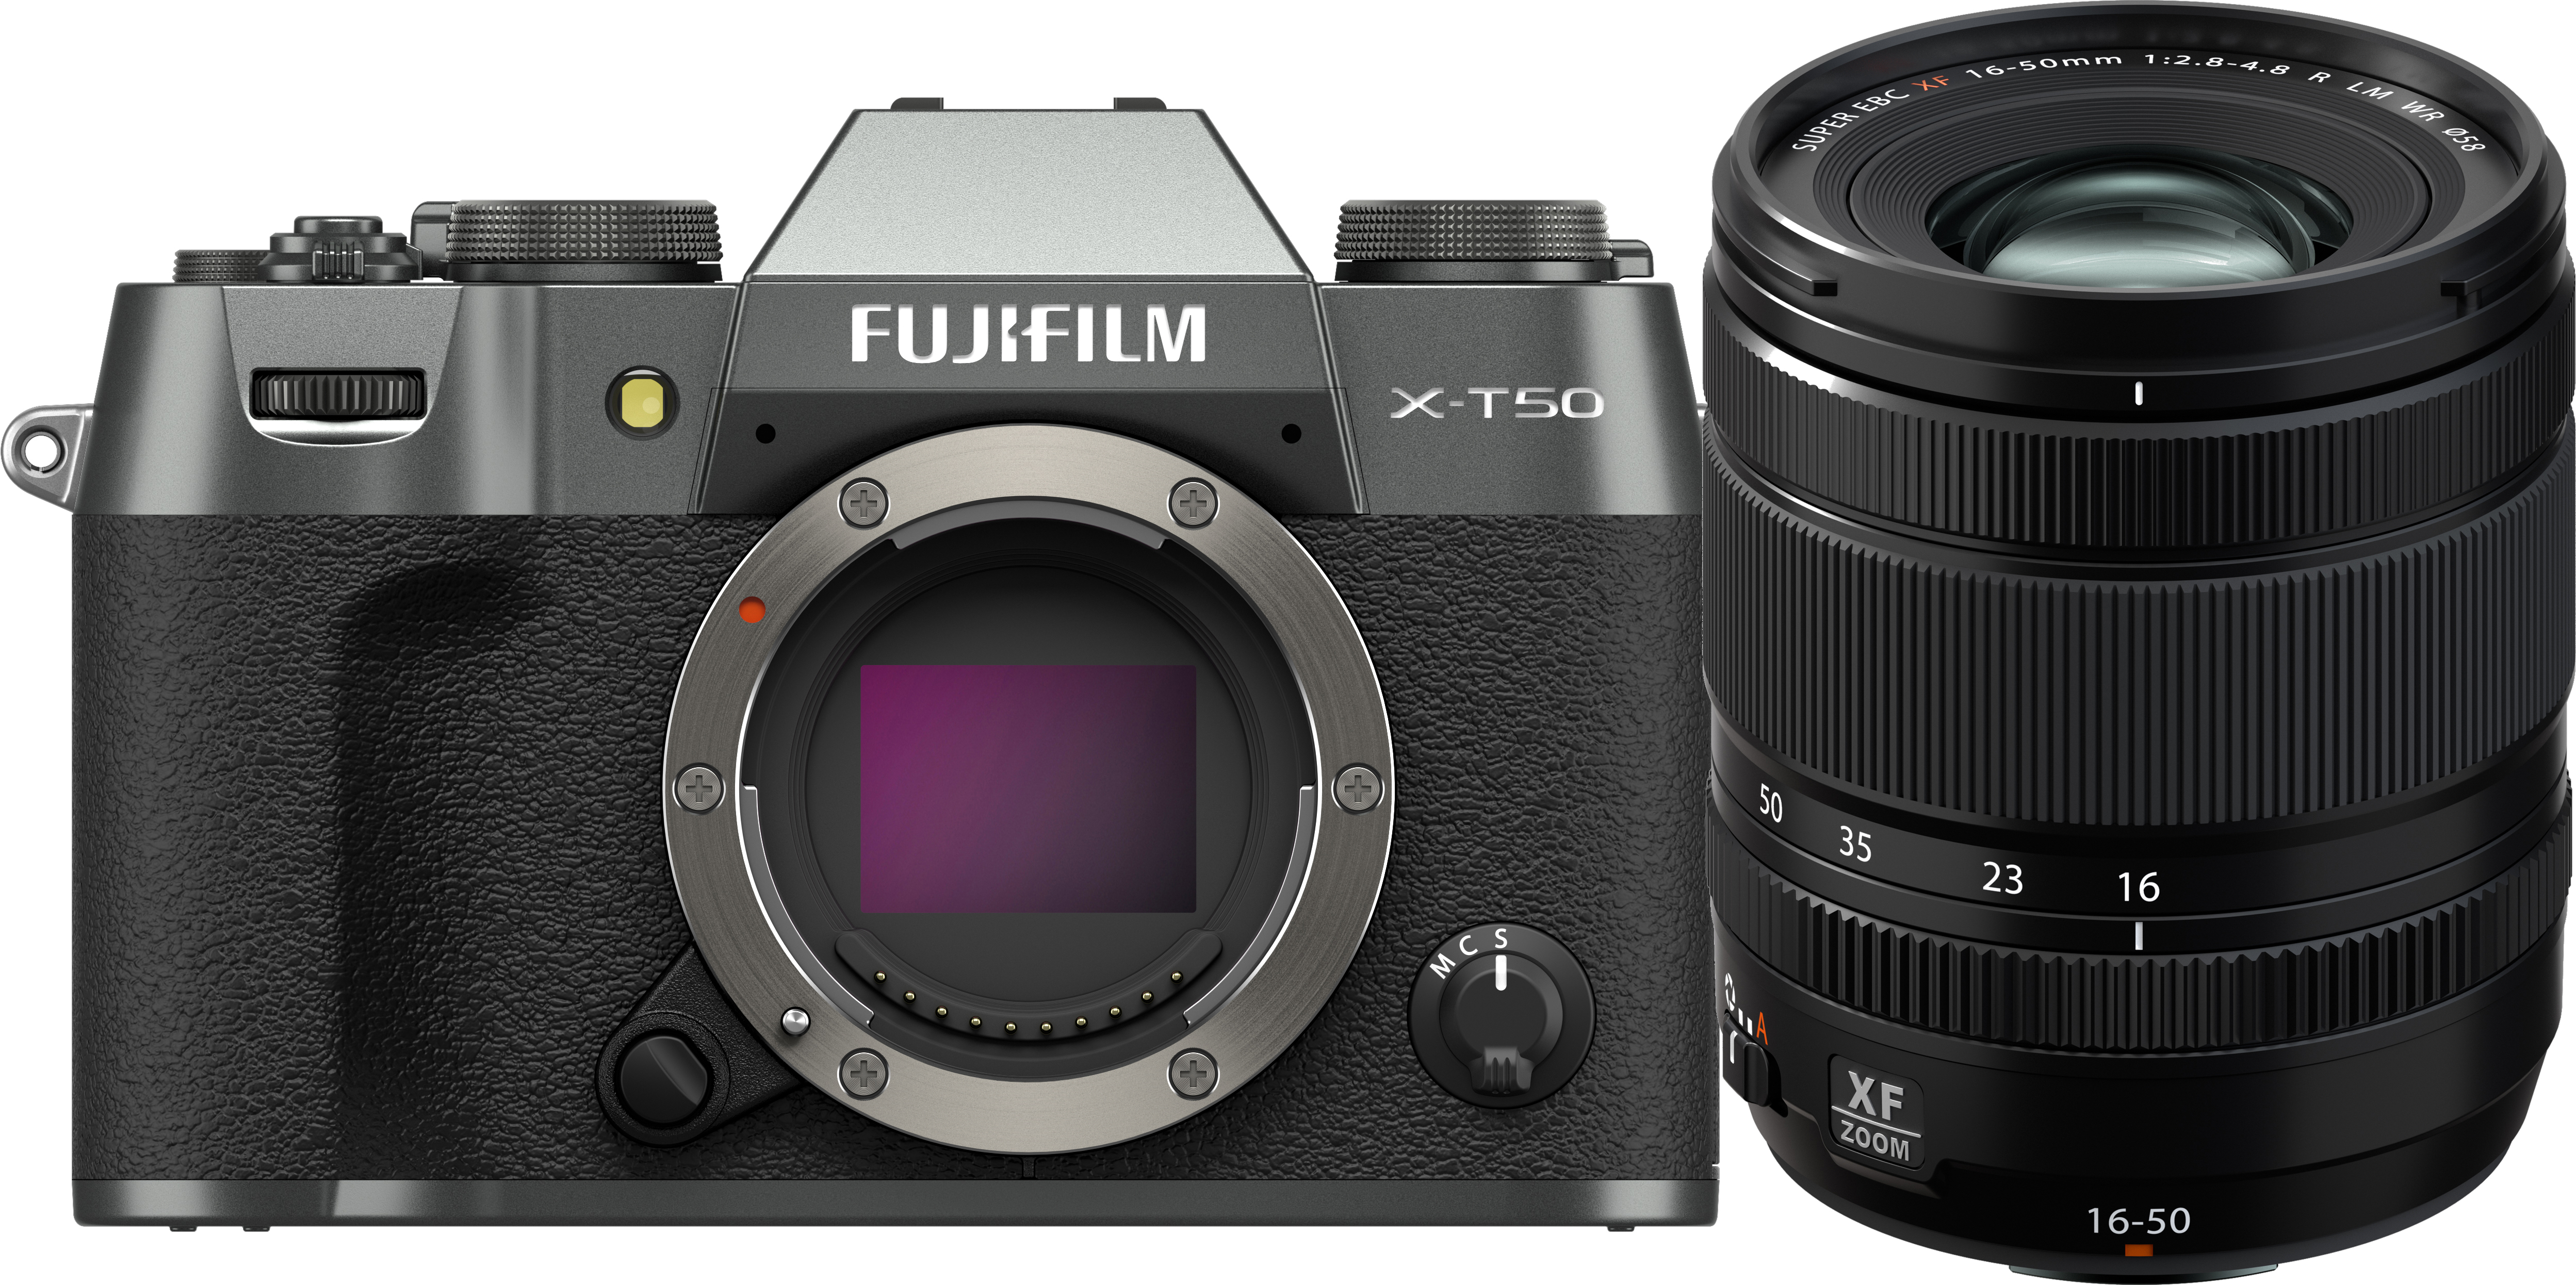 Fujifilm X-T50 Mirrorless Camera with XF 16-50mm f/2.8-4.8 Lens (Charcoal Silver)